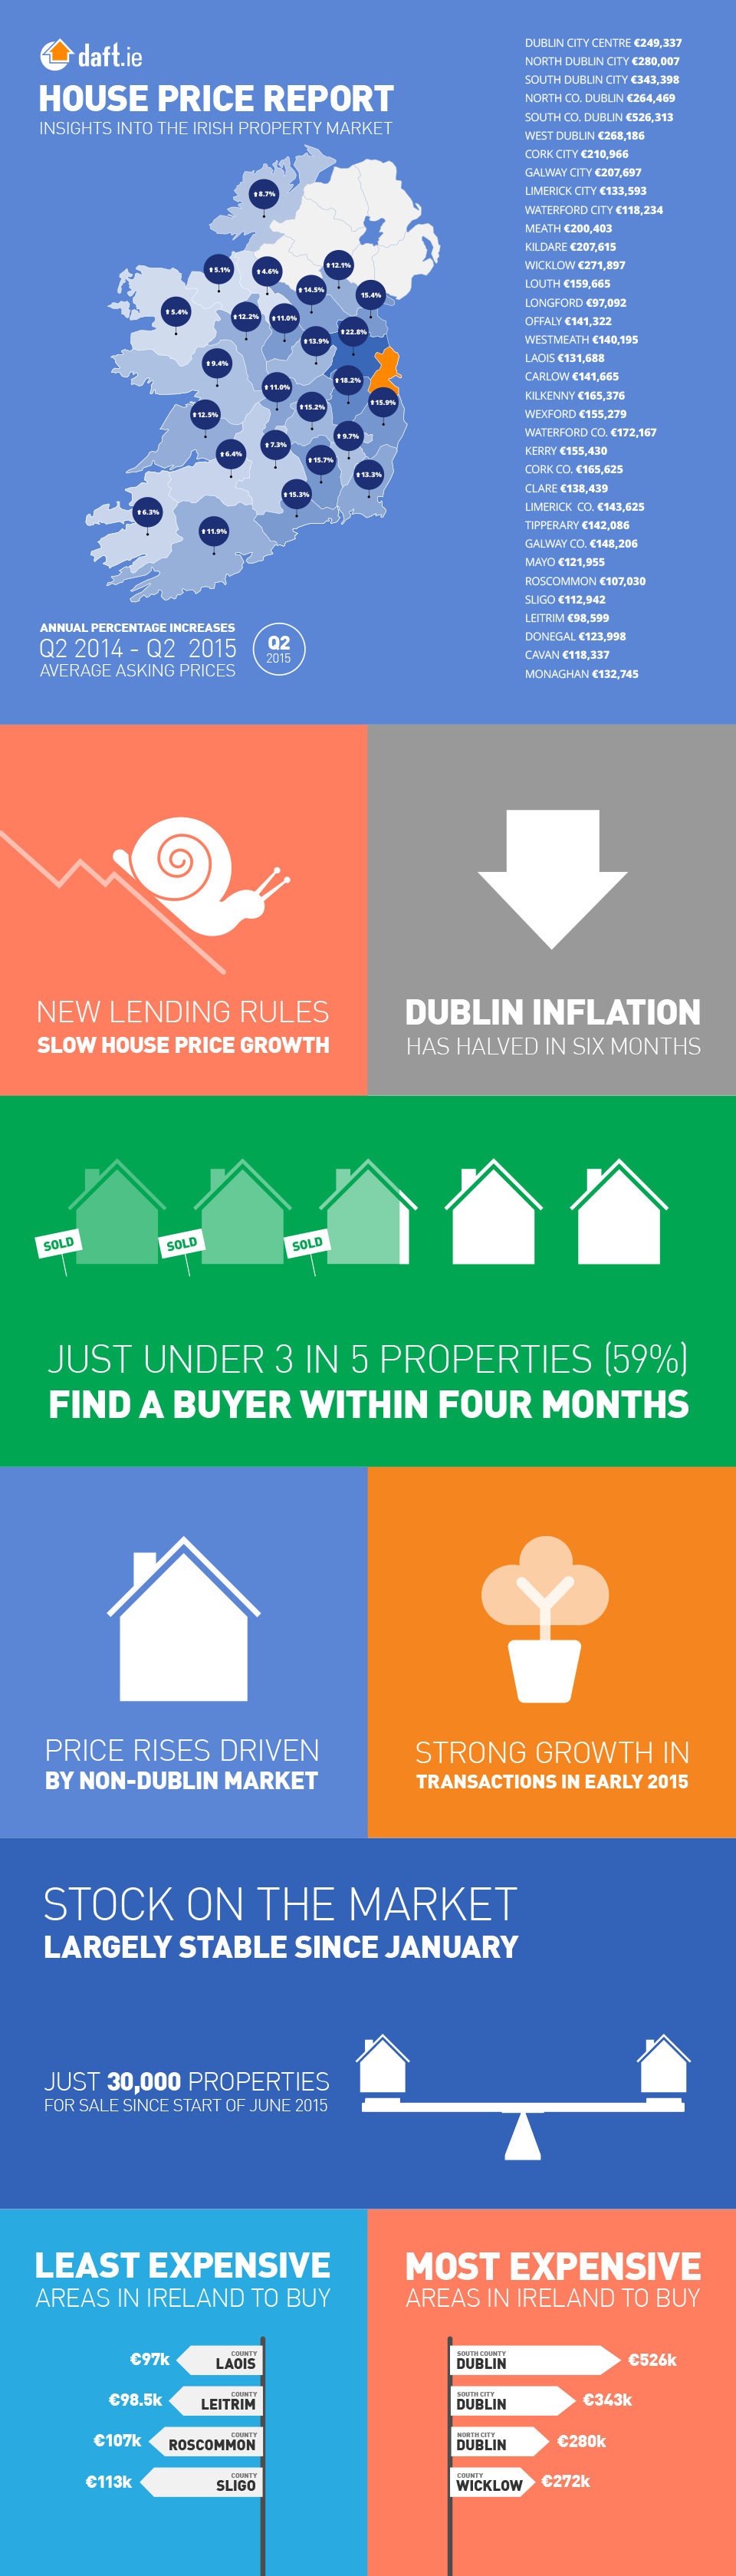 Daft.ie House Price Report: Q2 2015 Infographic